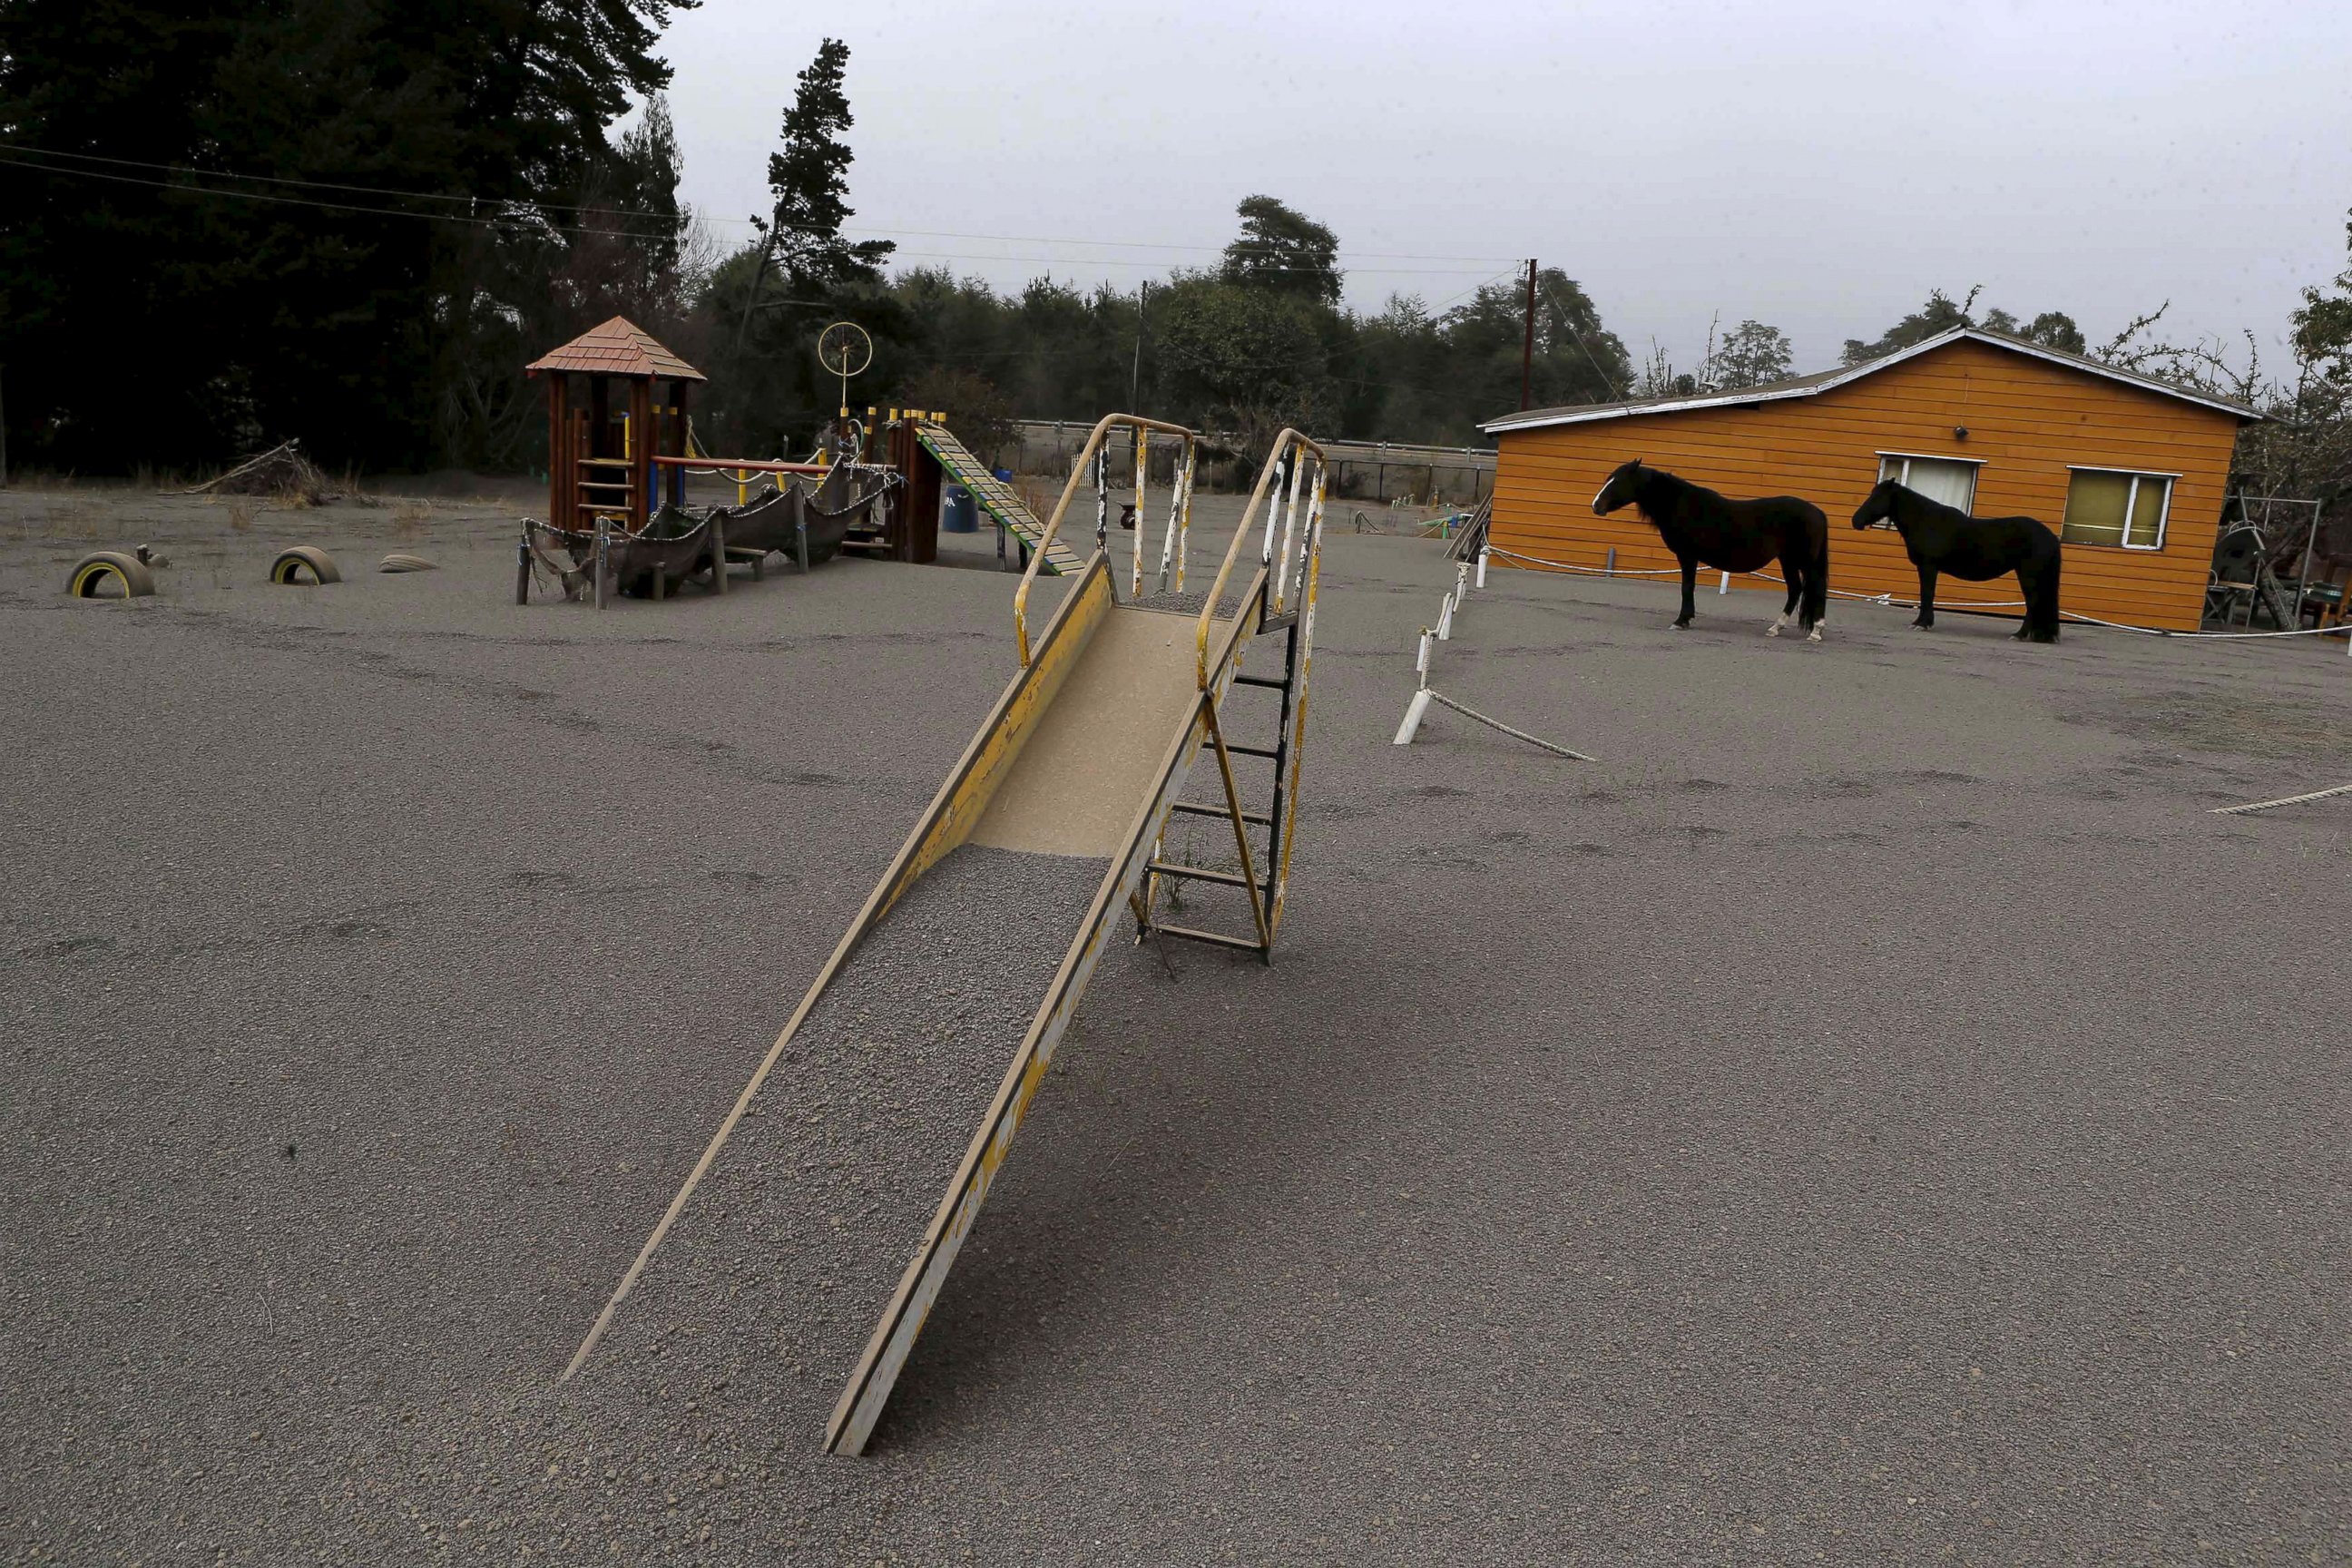 PHOTO: Horses are seen at a playground area covered with ash from Calbuco volcano at Ensenada town near Puerto Varas city April 23, 2015.